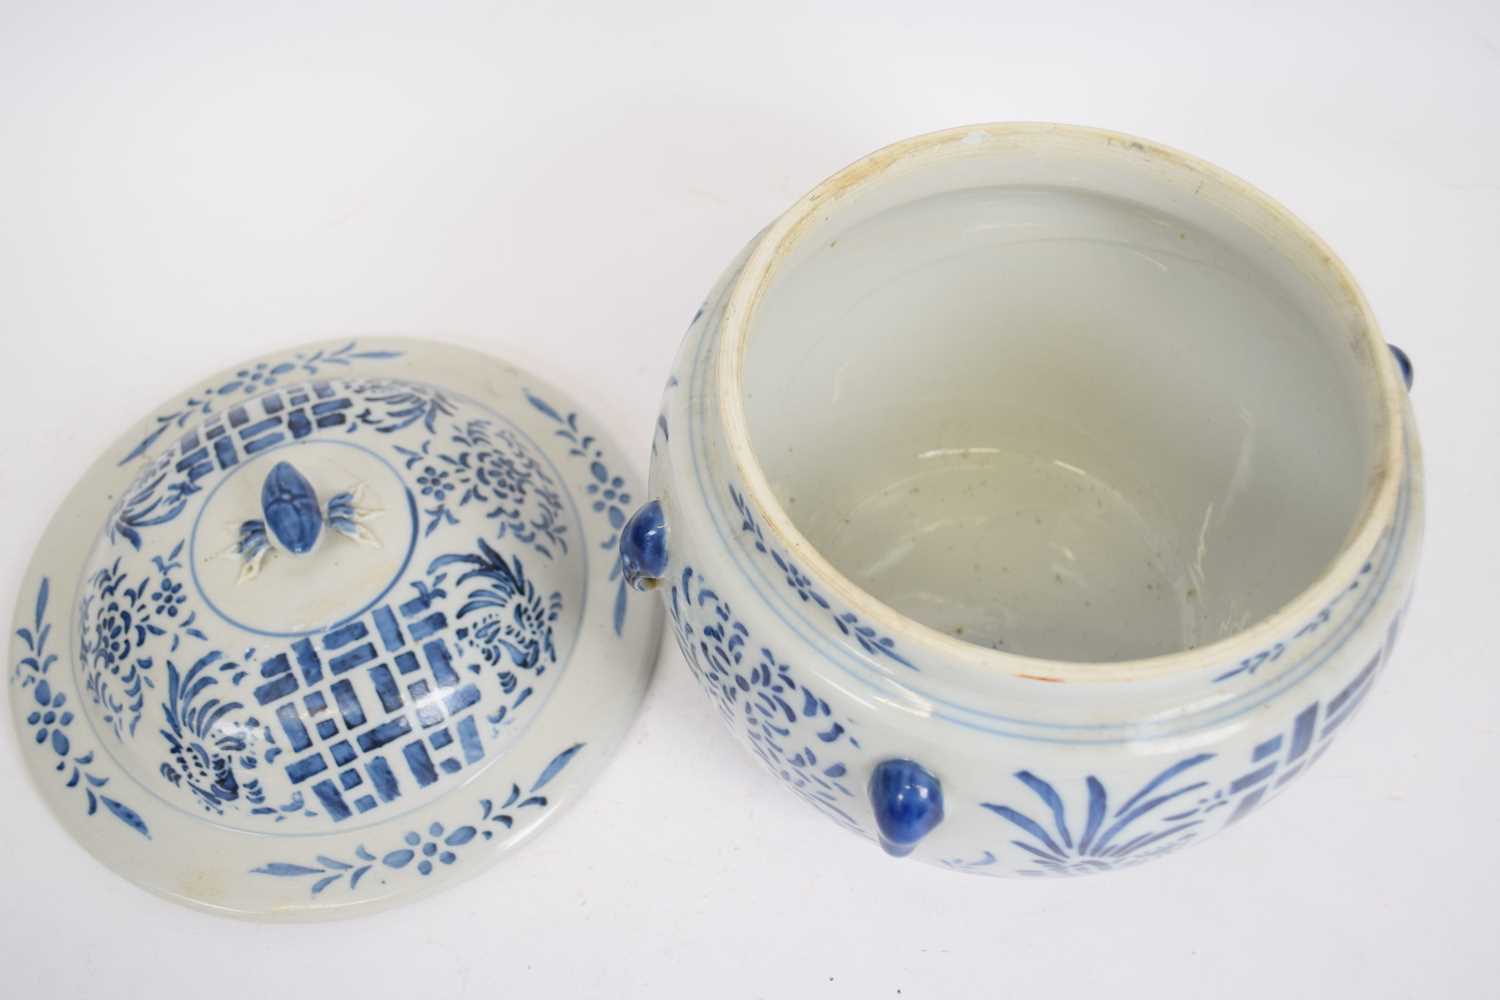 Chinese Porcelain B/W Jar and Cover - Image 3 of 4